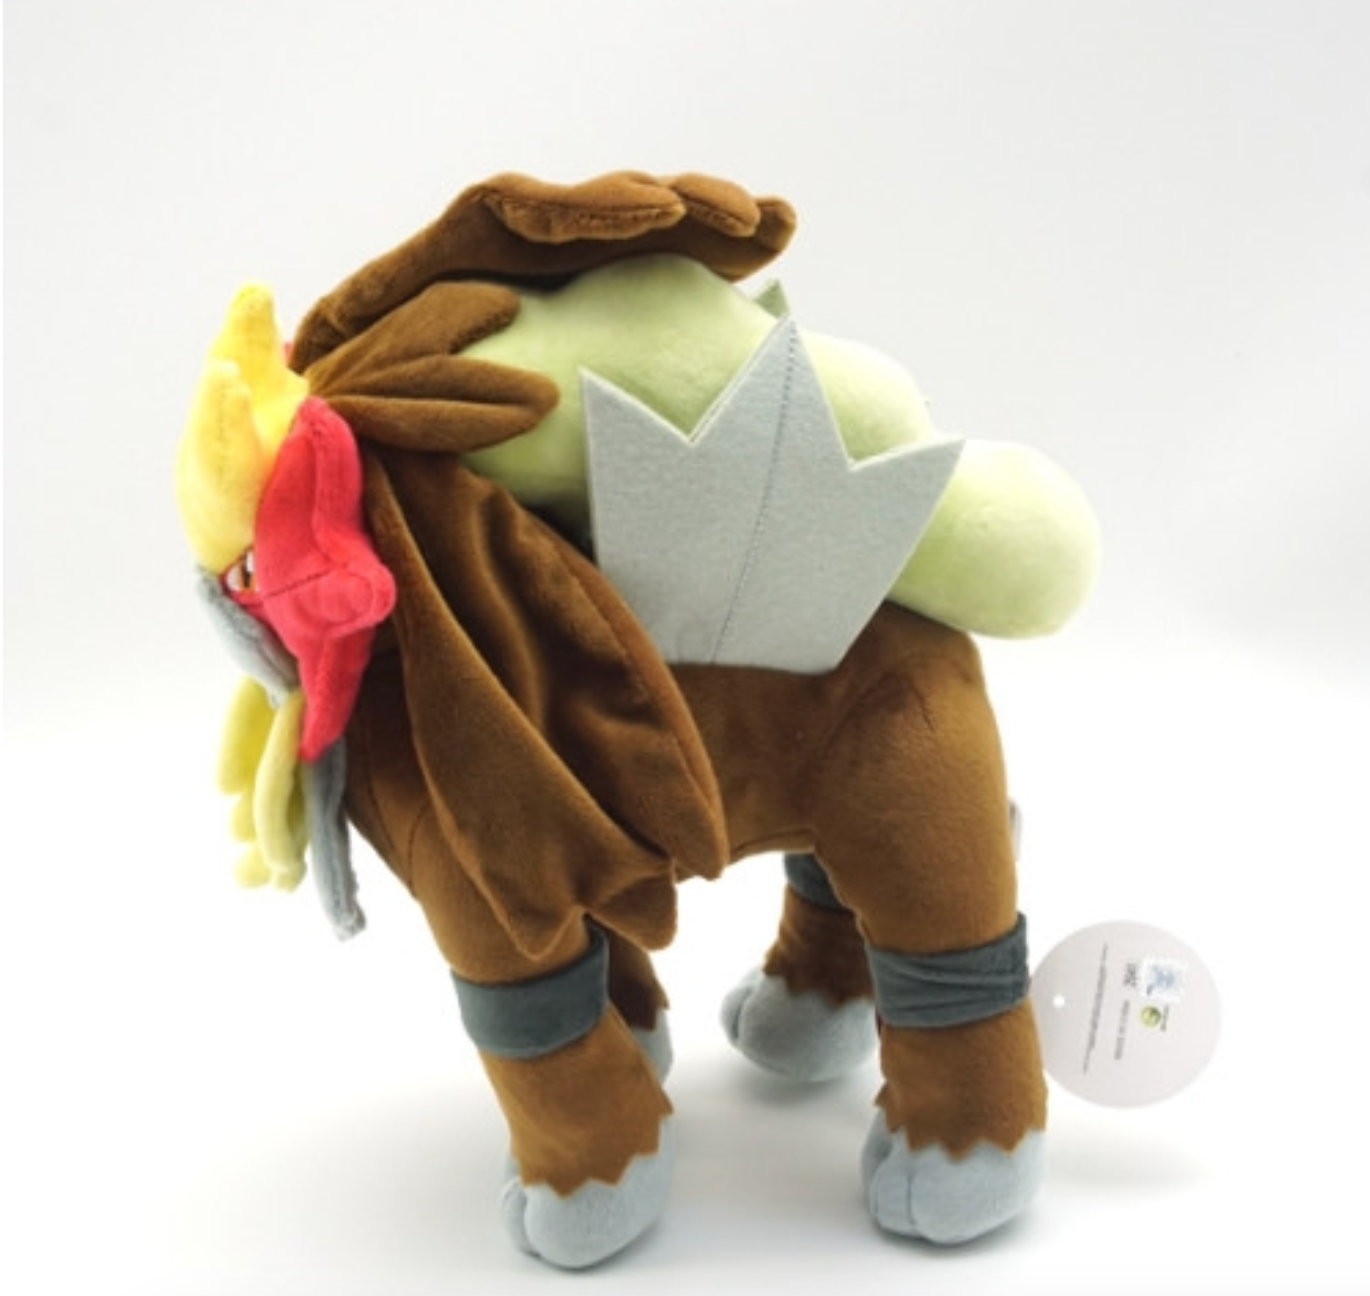 Pokemon Entei 10" Fluffy Plushies Toy Stuffed Animals Plush Doll Great Gift for Kids Fans